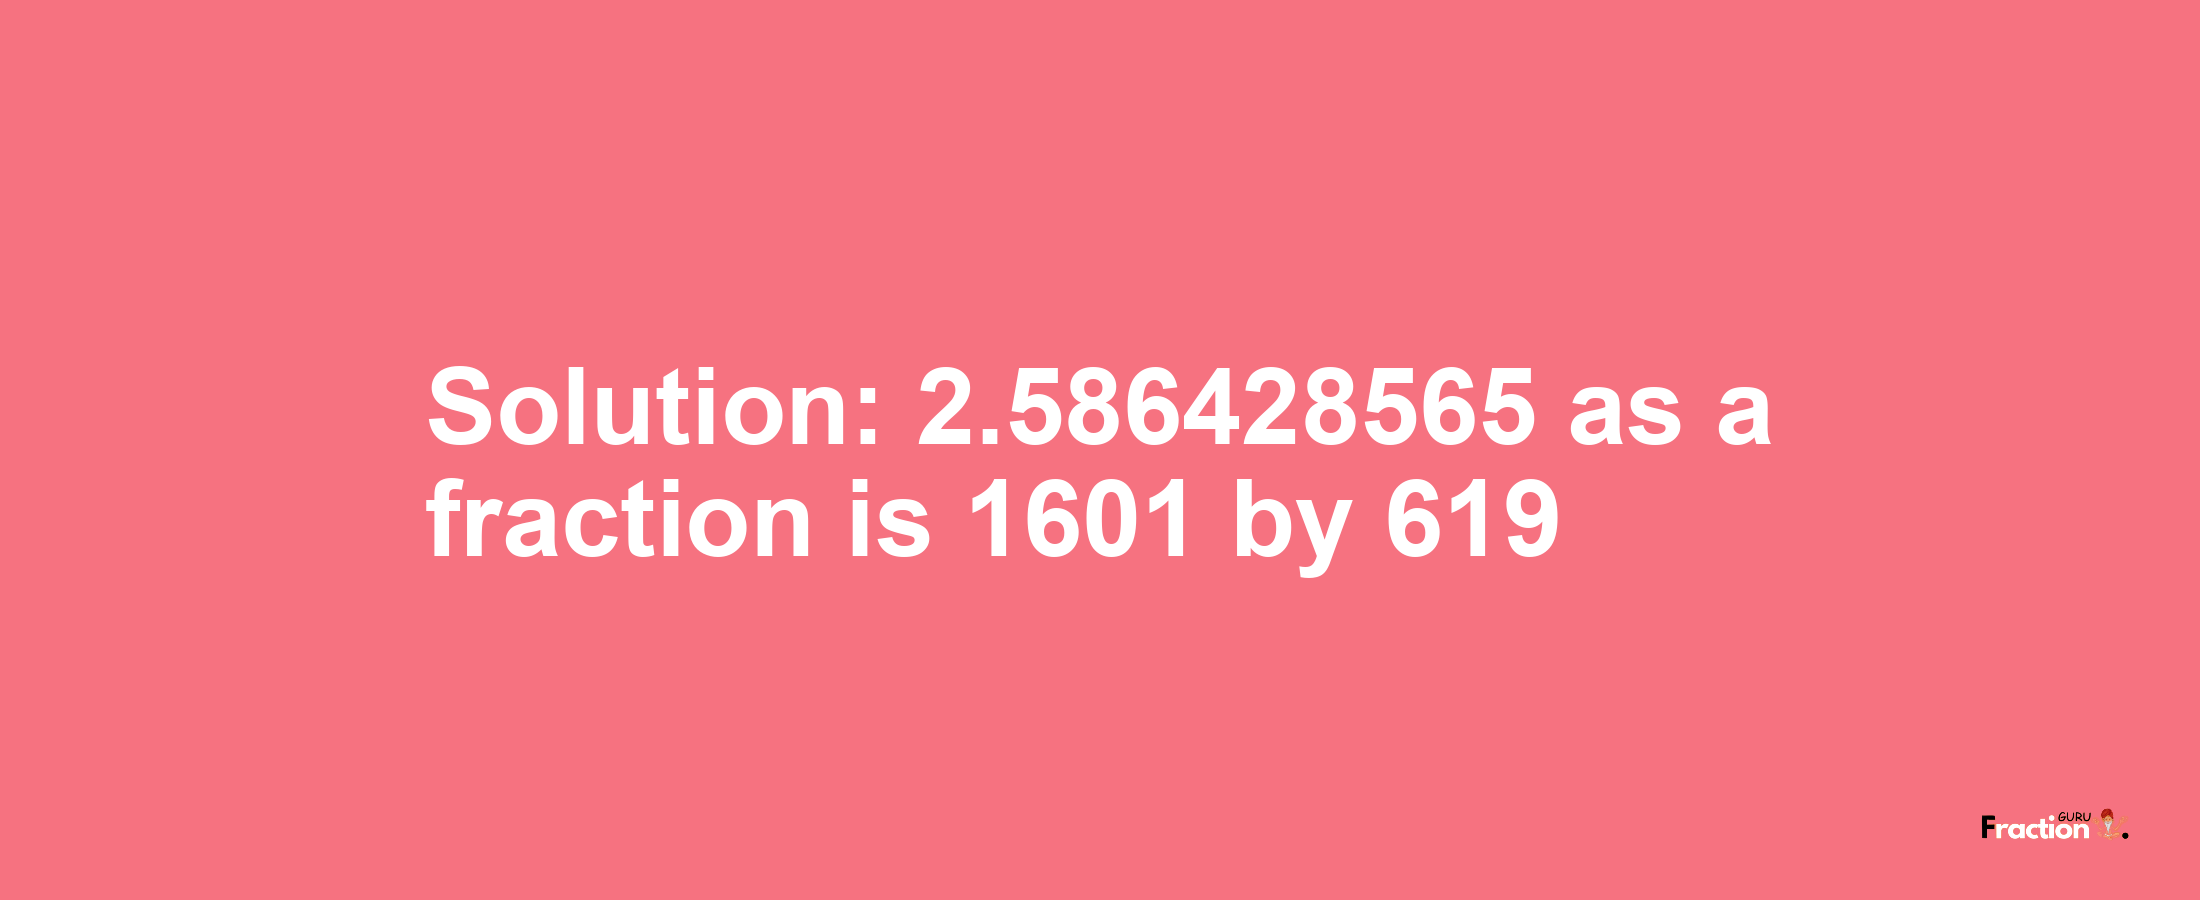 Solution:2.586428565 as a fraction is 1601/619